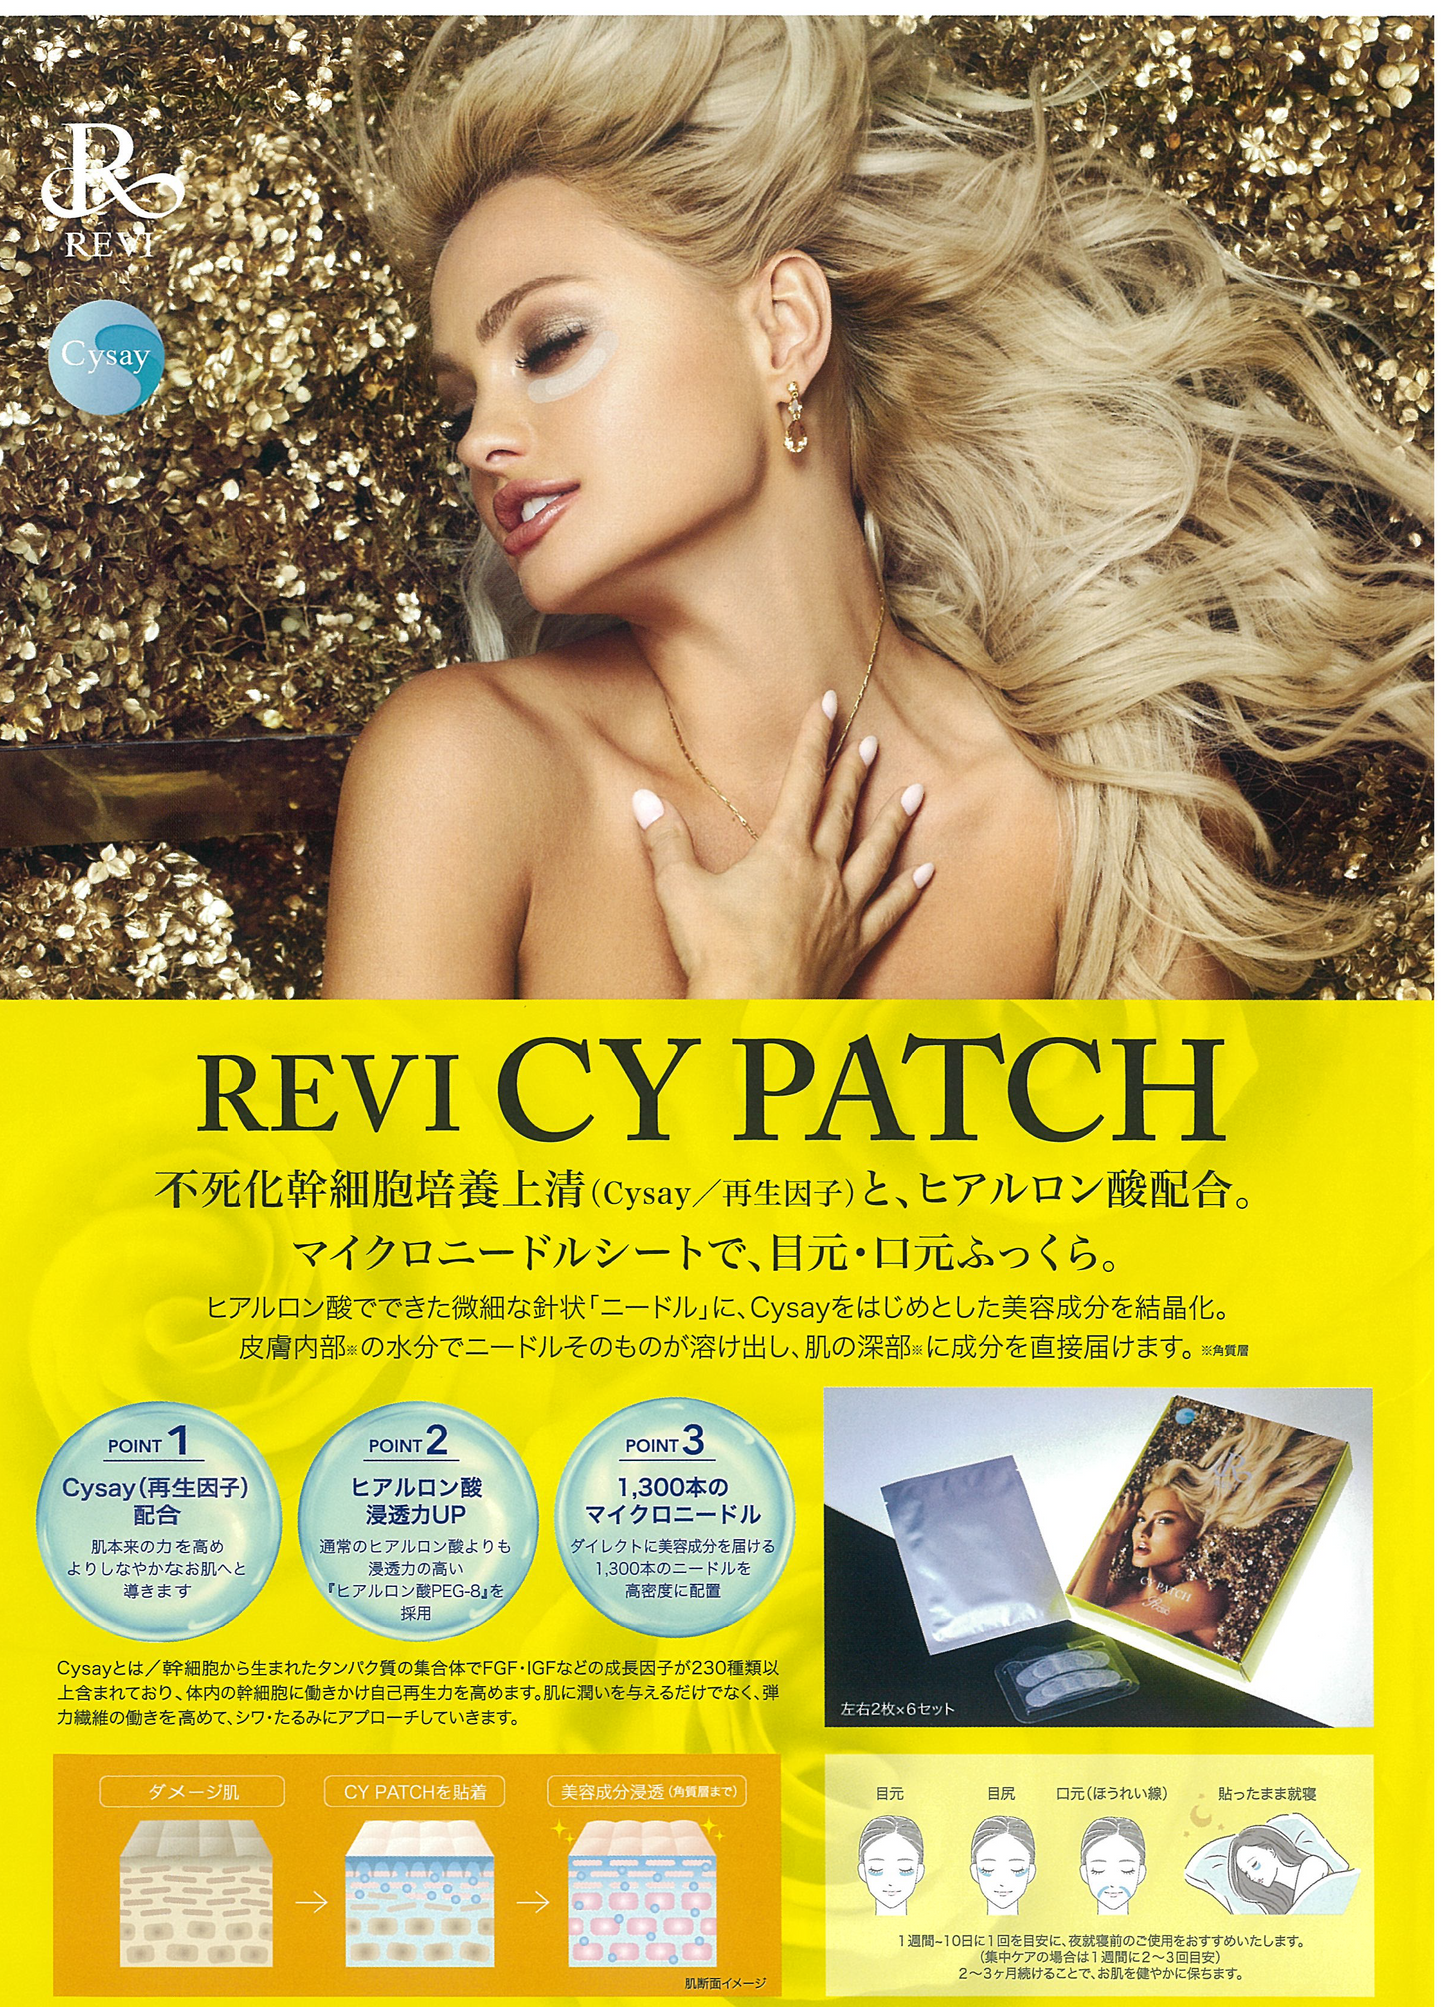 Revi CY PATCH 左右2枚×6セット(12枚入り)